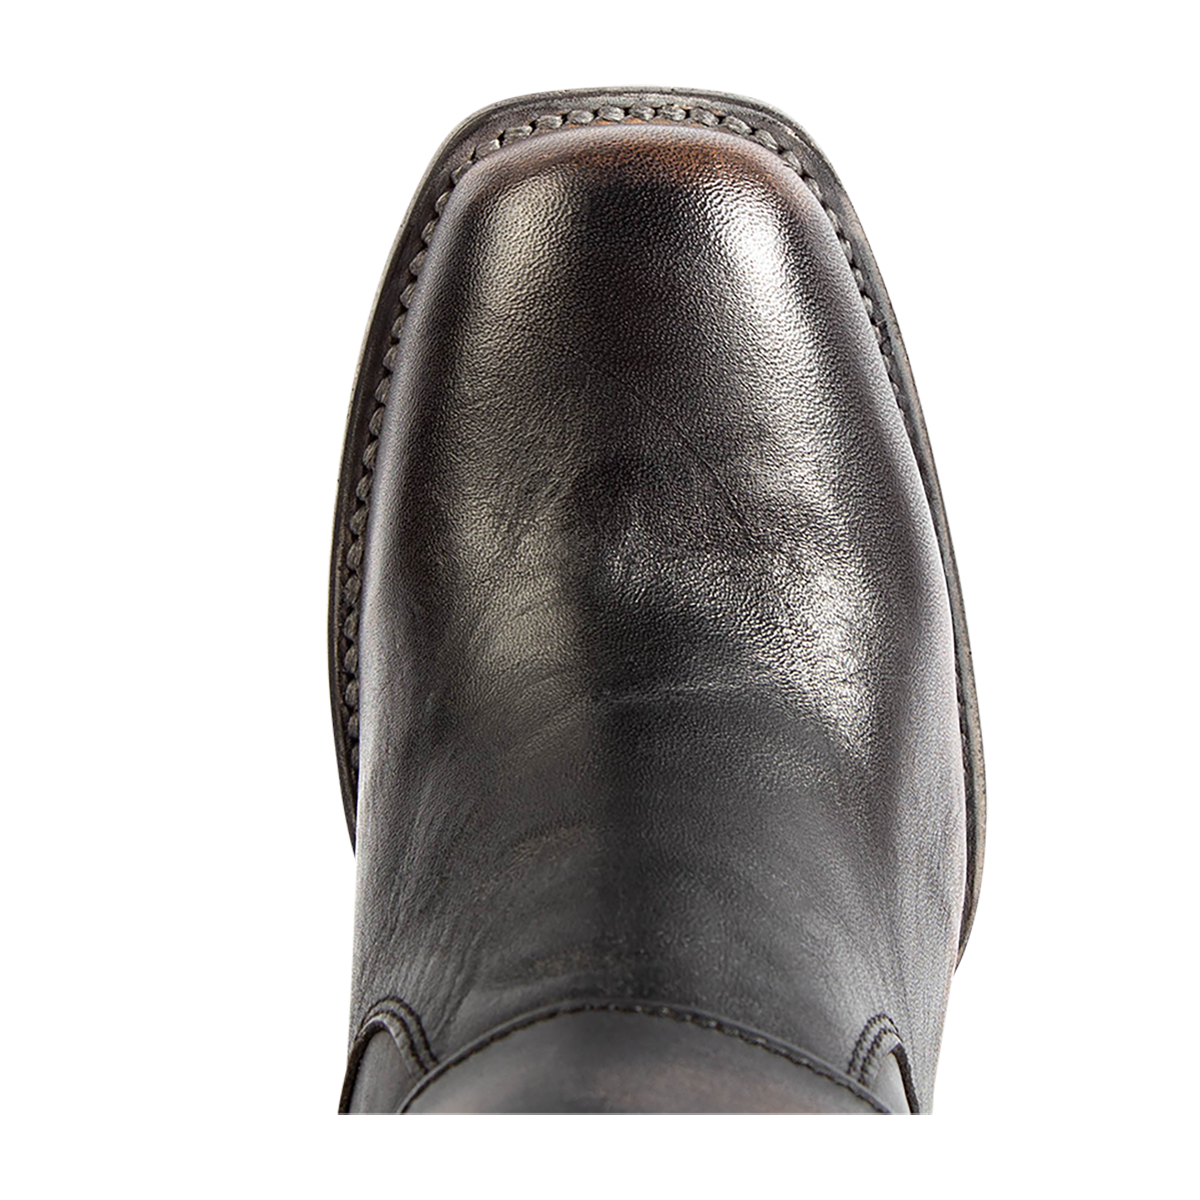 Top view showing square toe on FREEBIRD women's Darcy black leather boot